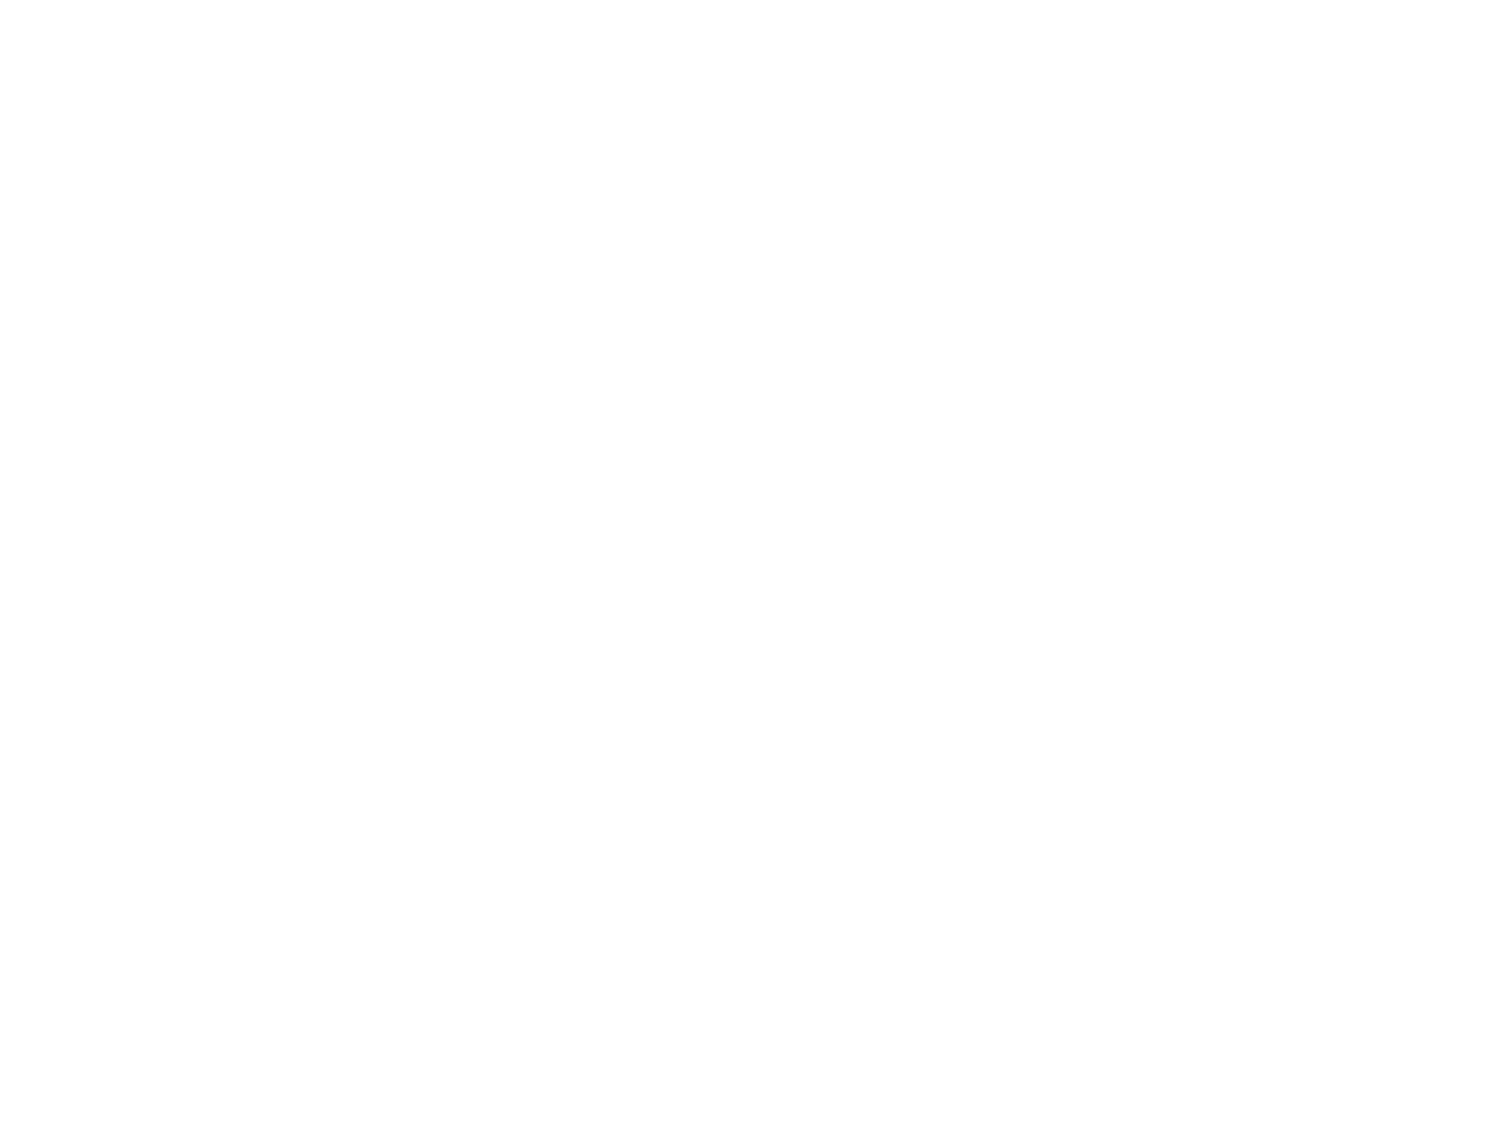 Darby Arens Creatives